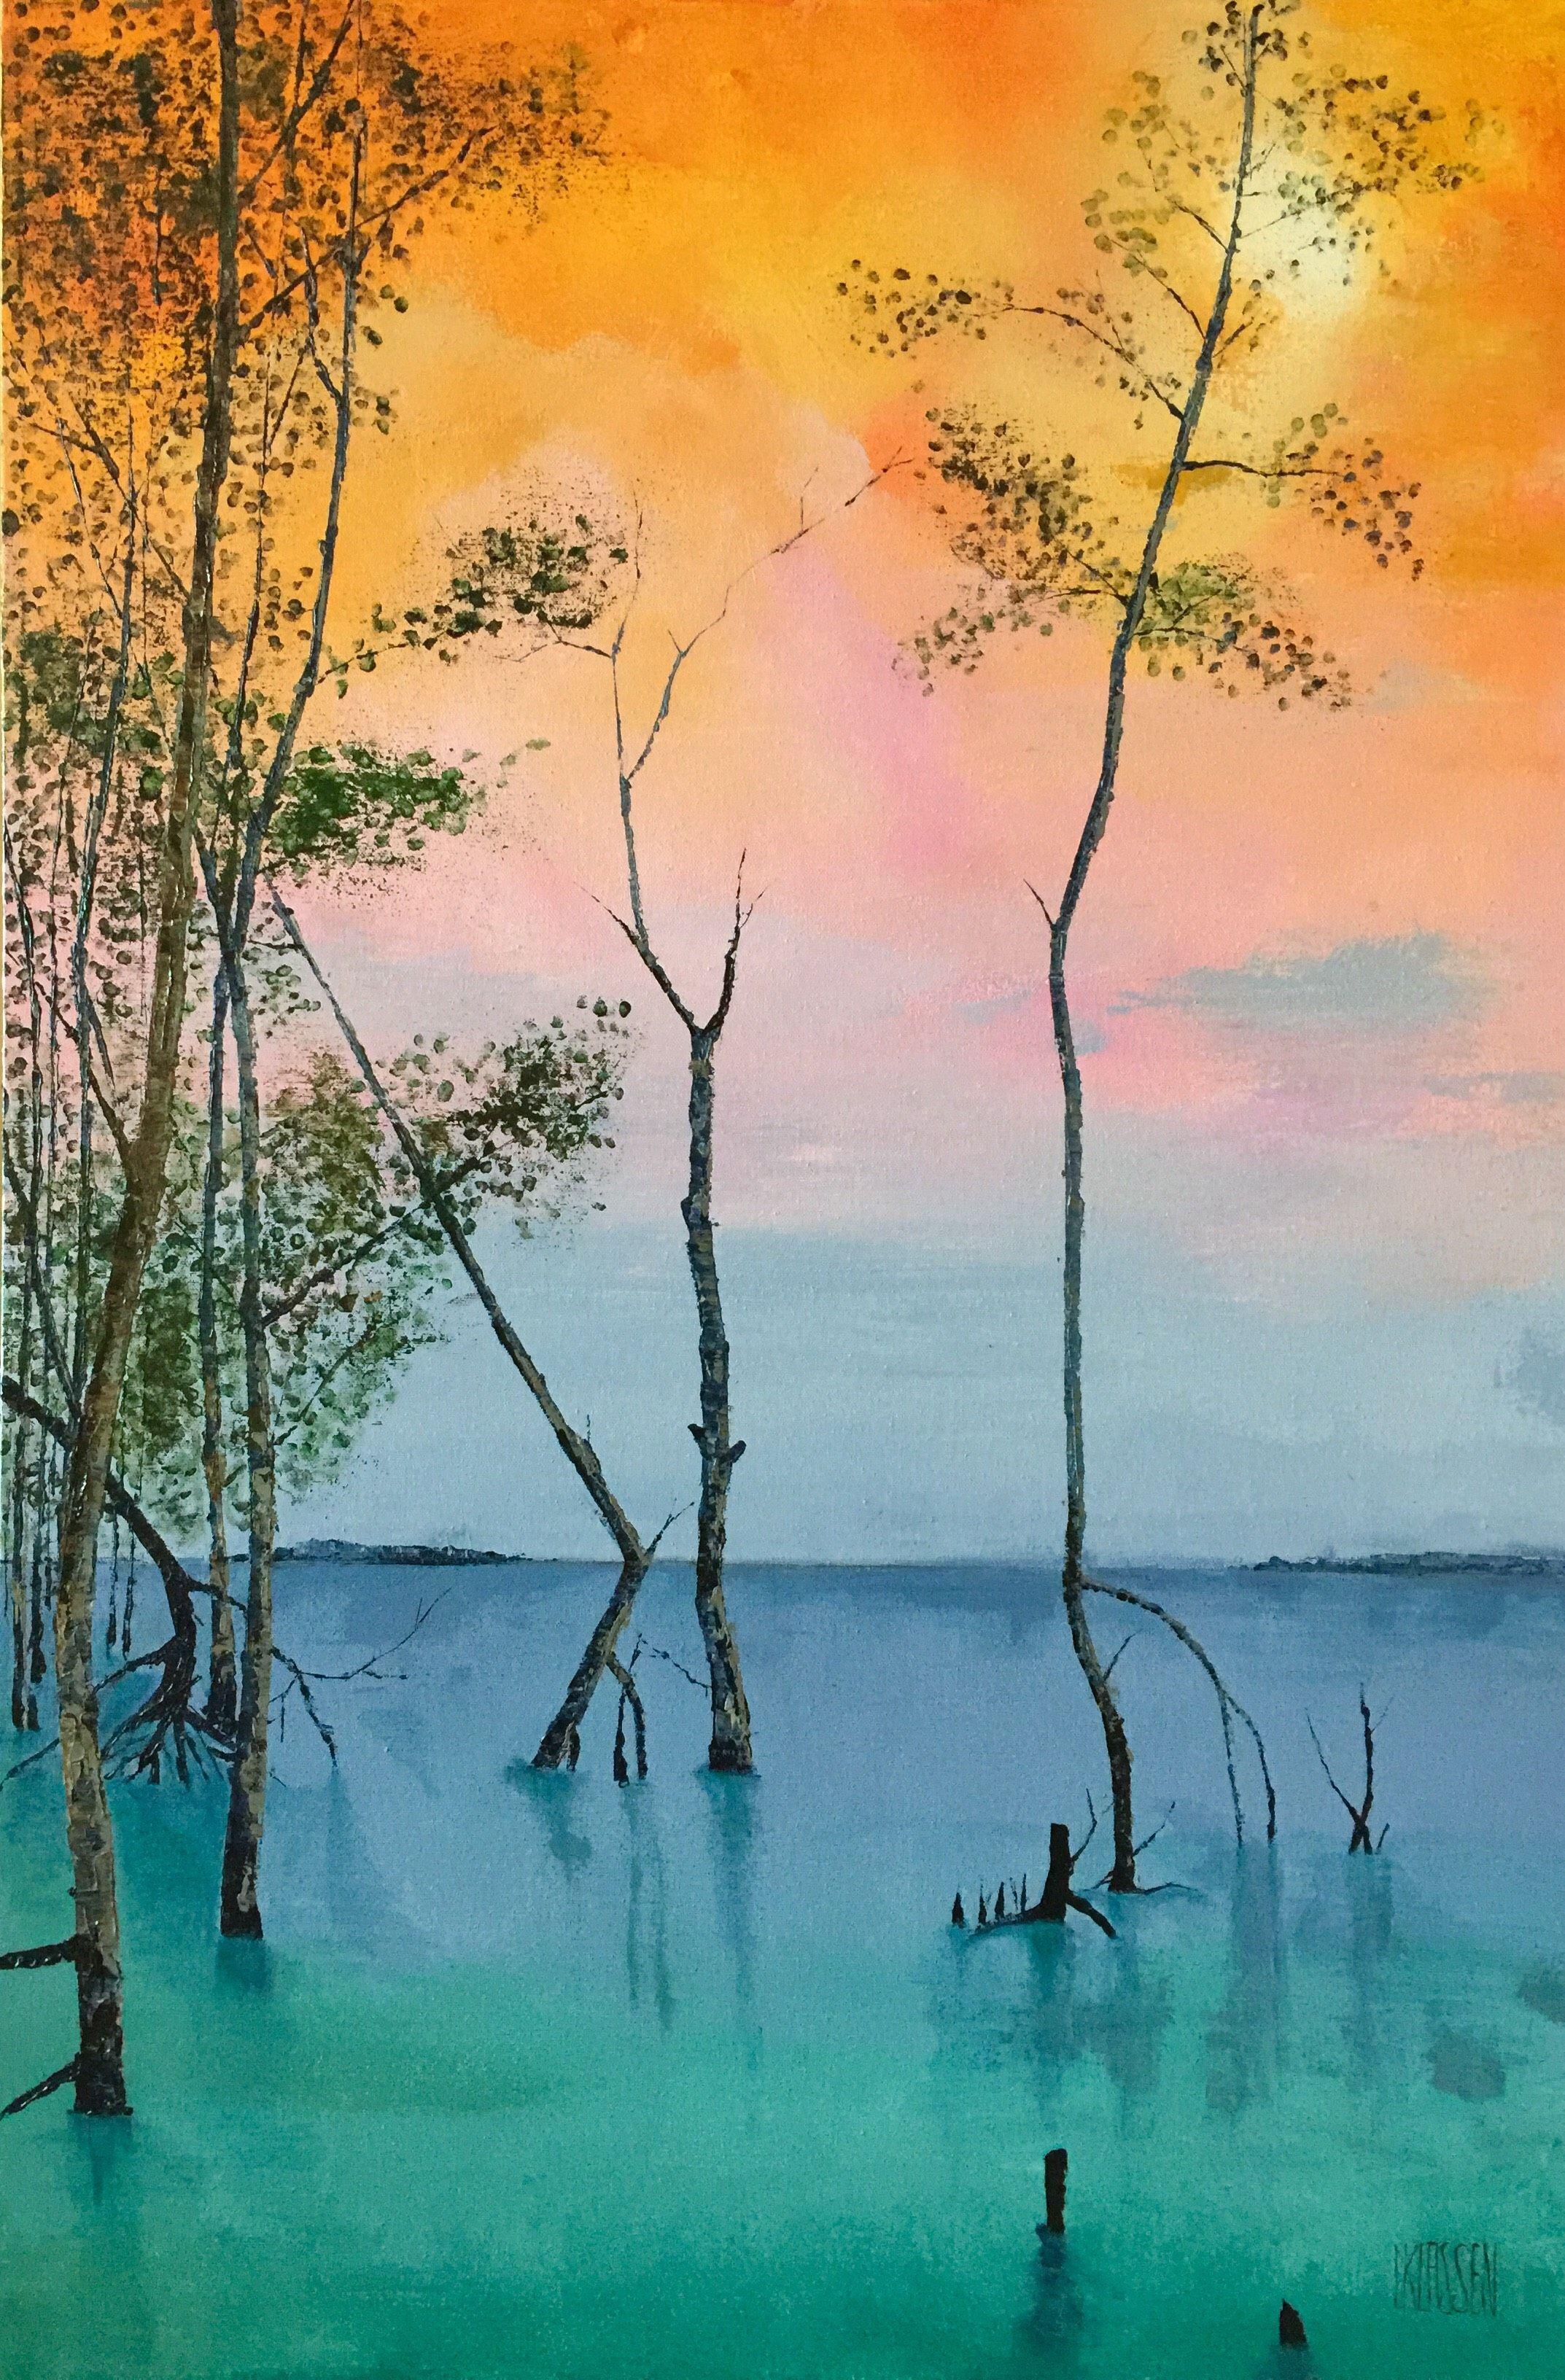 A vibrant painting that stirs memories of lazy hot summer nights, summer holidays and peaceful times by the lake.  This piece is acrylic on canvas in the impressionist style.  Contemporary and gorgeous color.  Works well in any decor.  Quality